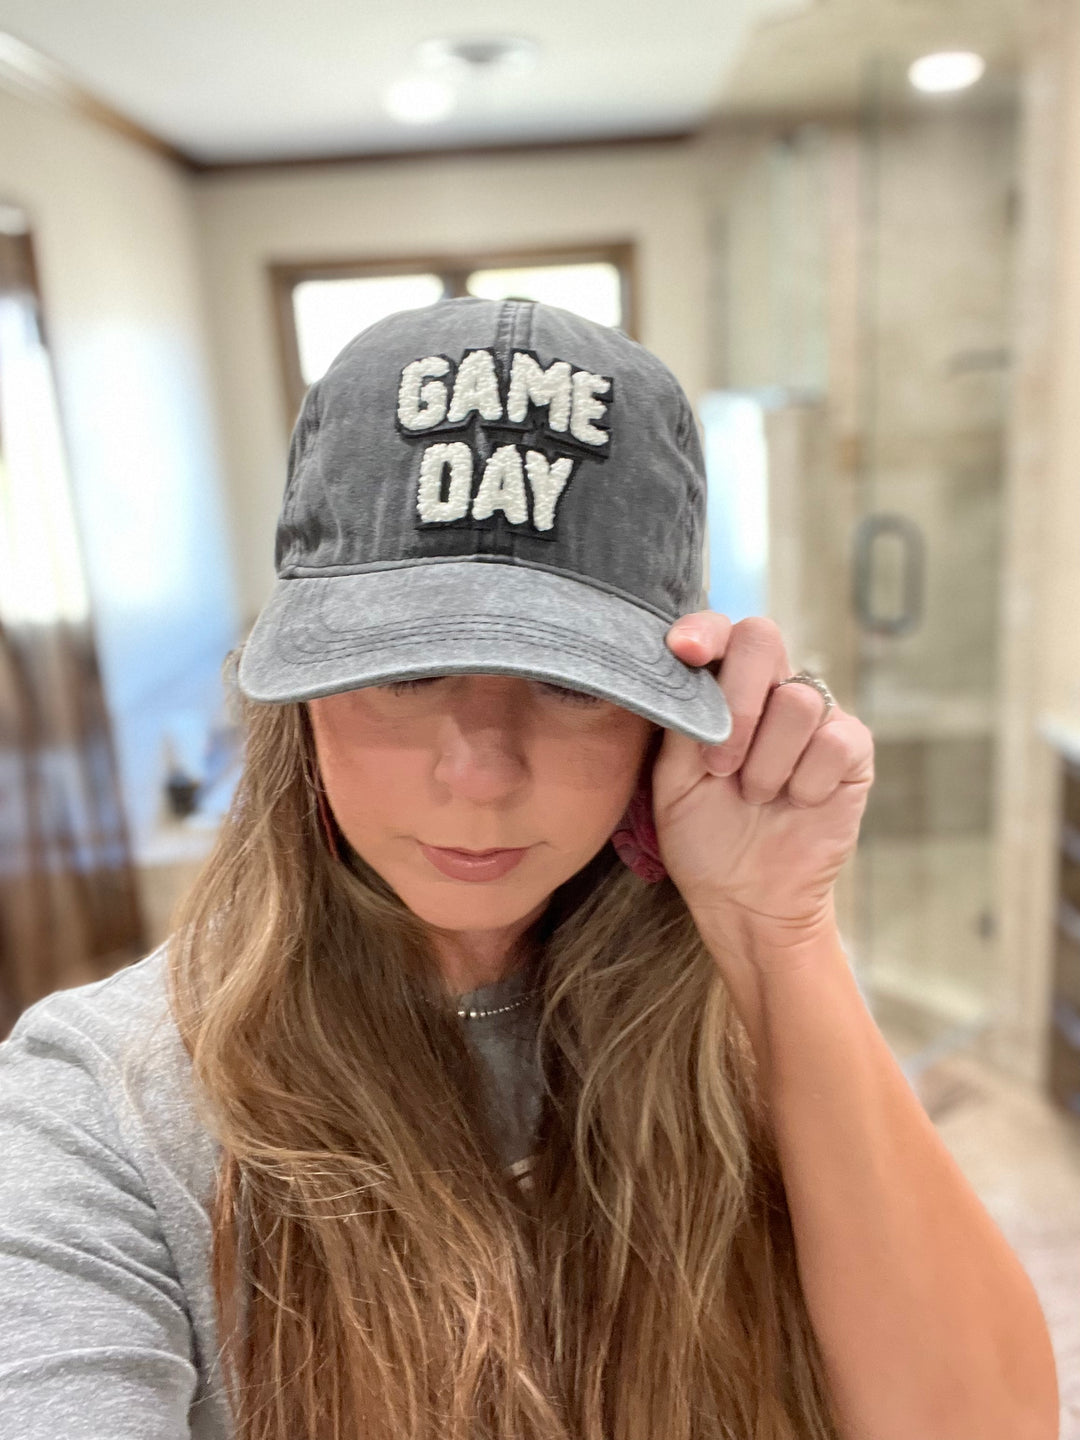 Game Day Caps